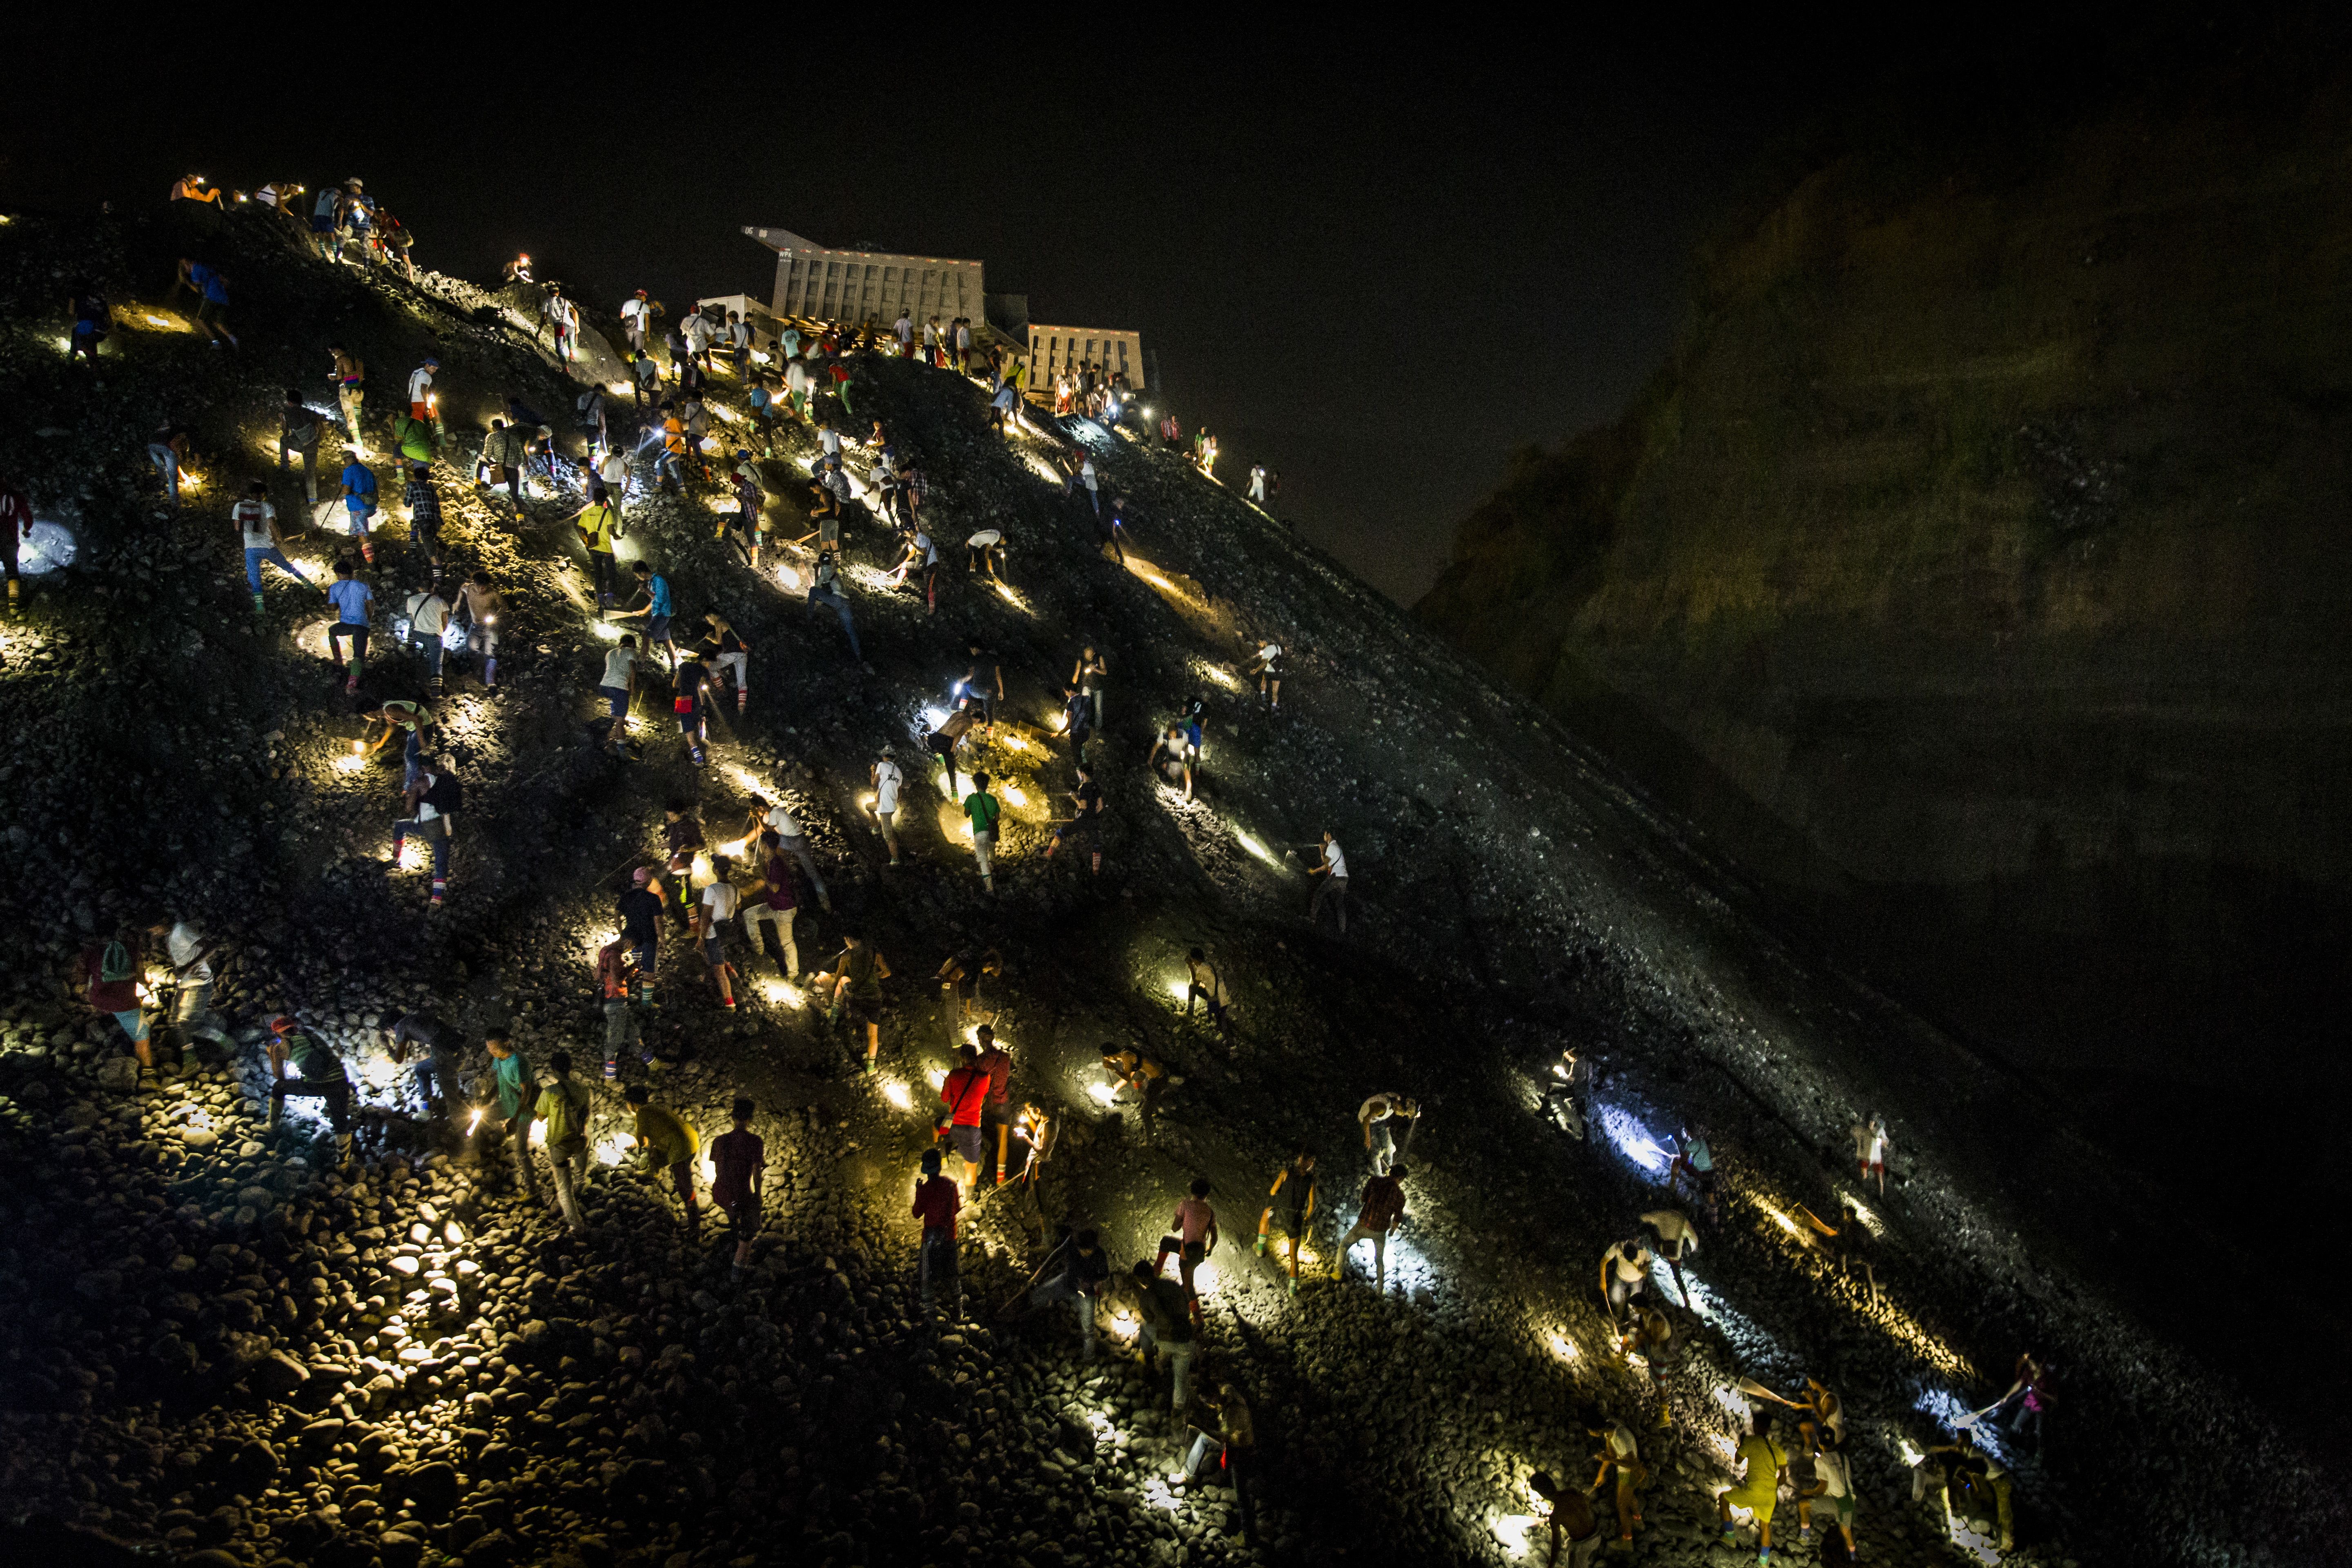 Freelance miners search for jade stones at night with torchlights on a waste site in Hpakant, Kachin State, Myanmar on May 21, 2019. Image by Hkun Lat. Myanmar, 2019.